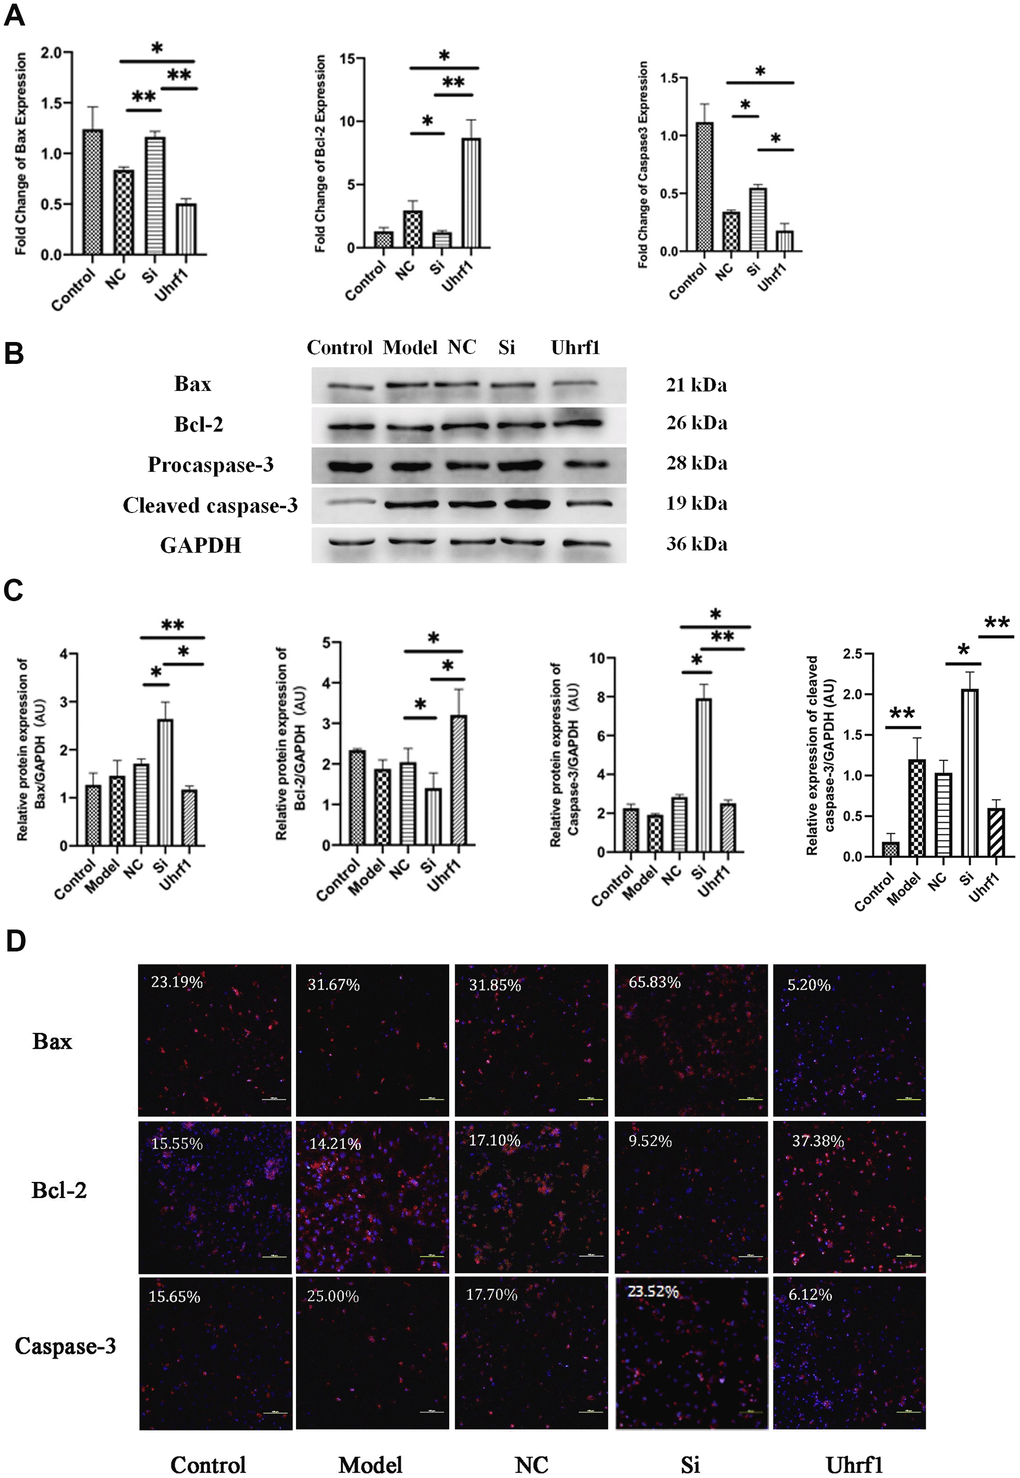 The effect of Uhrf1 on cardiomyocyte apoptosis during myocardial ischemia-reperfusion injury. (A) The relative mRNA expressions of Bax, Bcl-2 and Caspase-3 in myocardial ischemia-reperfusion model in vitro were determined by qRT-PCR. (B) Western blot was used to detect the expression level of Bax, Bcl-2 and Caspase-3 protein in each group. GAPDH serves as a loading control. (C) Expression of Bax, Bcl-2 and Caspase-3 protein relative to GAPDH data from 3 biological repeats is shown. (D) Detection of Bax, Bcl-2 and Caspase-3 protein expression and semi quantitative analysis by immunofluorescence microscopy (x200). Scale bar, 100 μm. Data shown are mean ± SD. *P P P P in vitro oxidative stress model; NC, negative control of RNAi; si, RNAi knockdown of Uhrf1; Uhrf1, Uhrf1 overexpression.